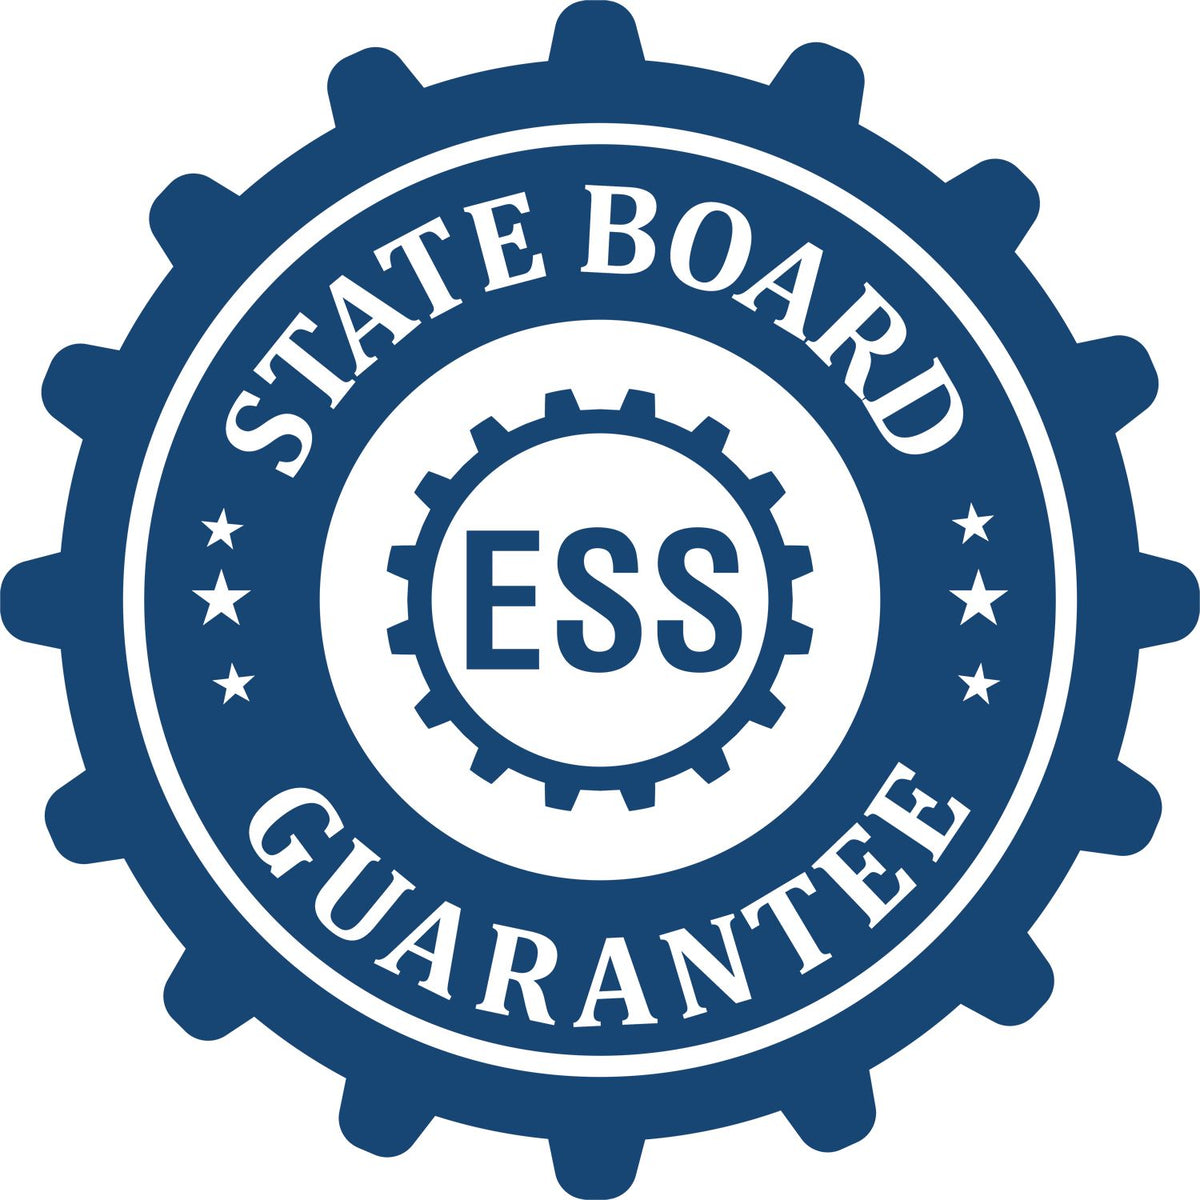 An emblem in a gear shape illustrating a state board guarantee for the Hybrid New Hampshire Architect Seal